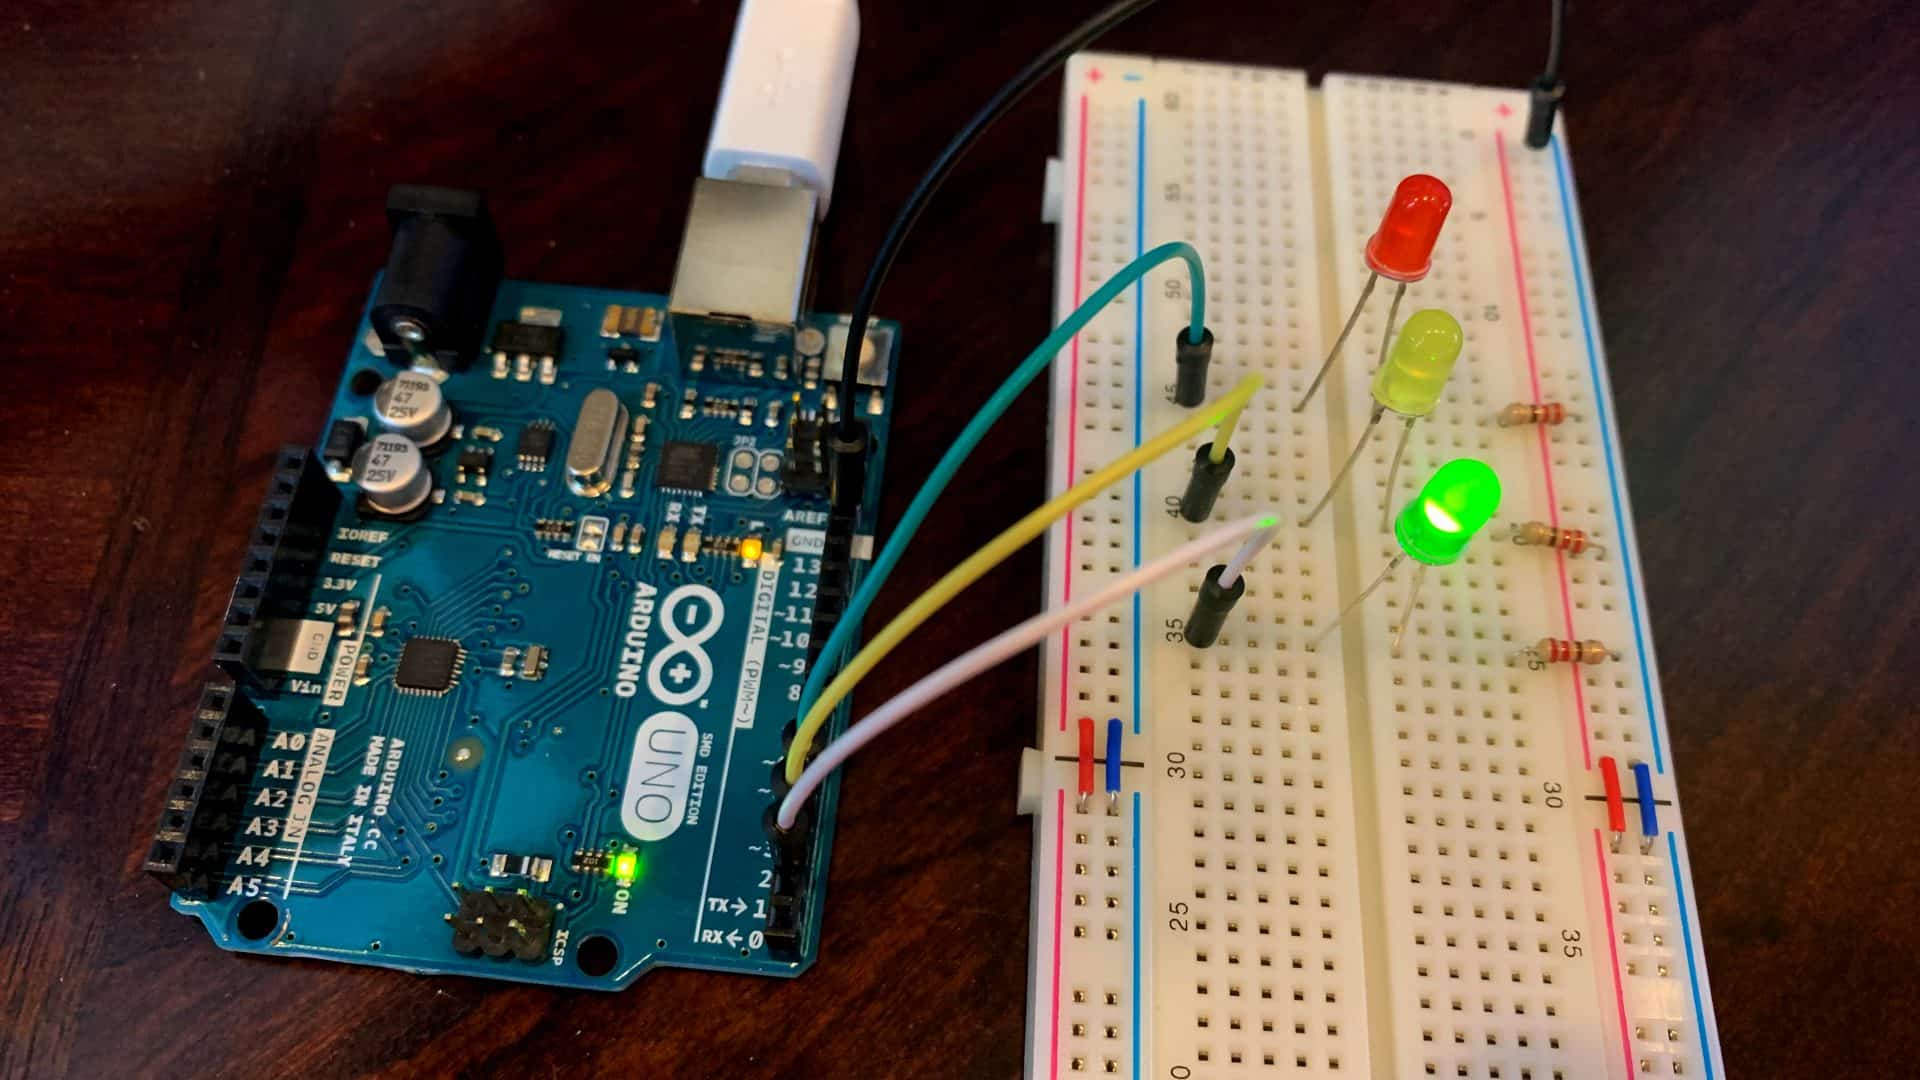 advanced arduino projects